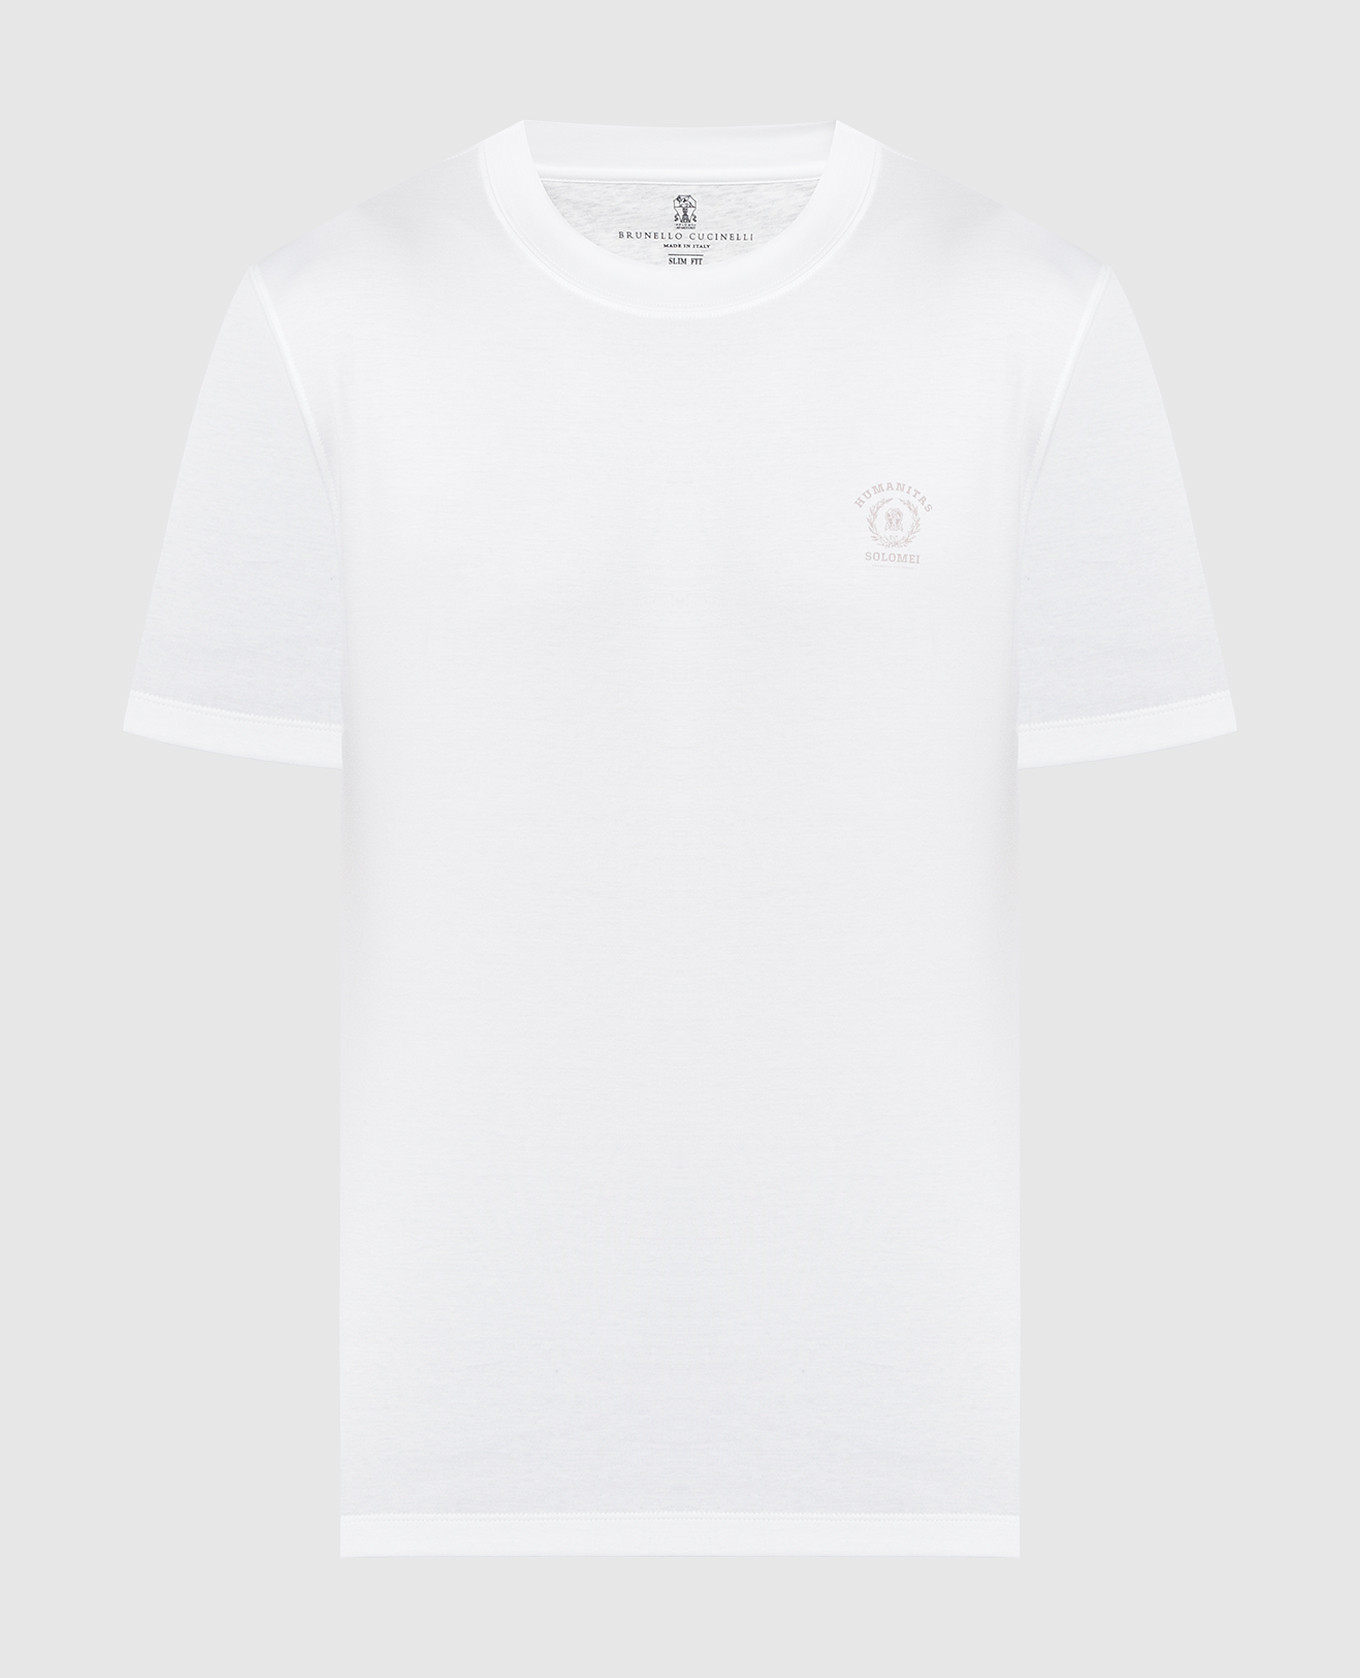 White t-shirt with a print